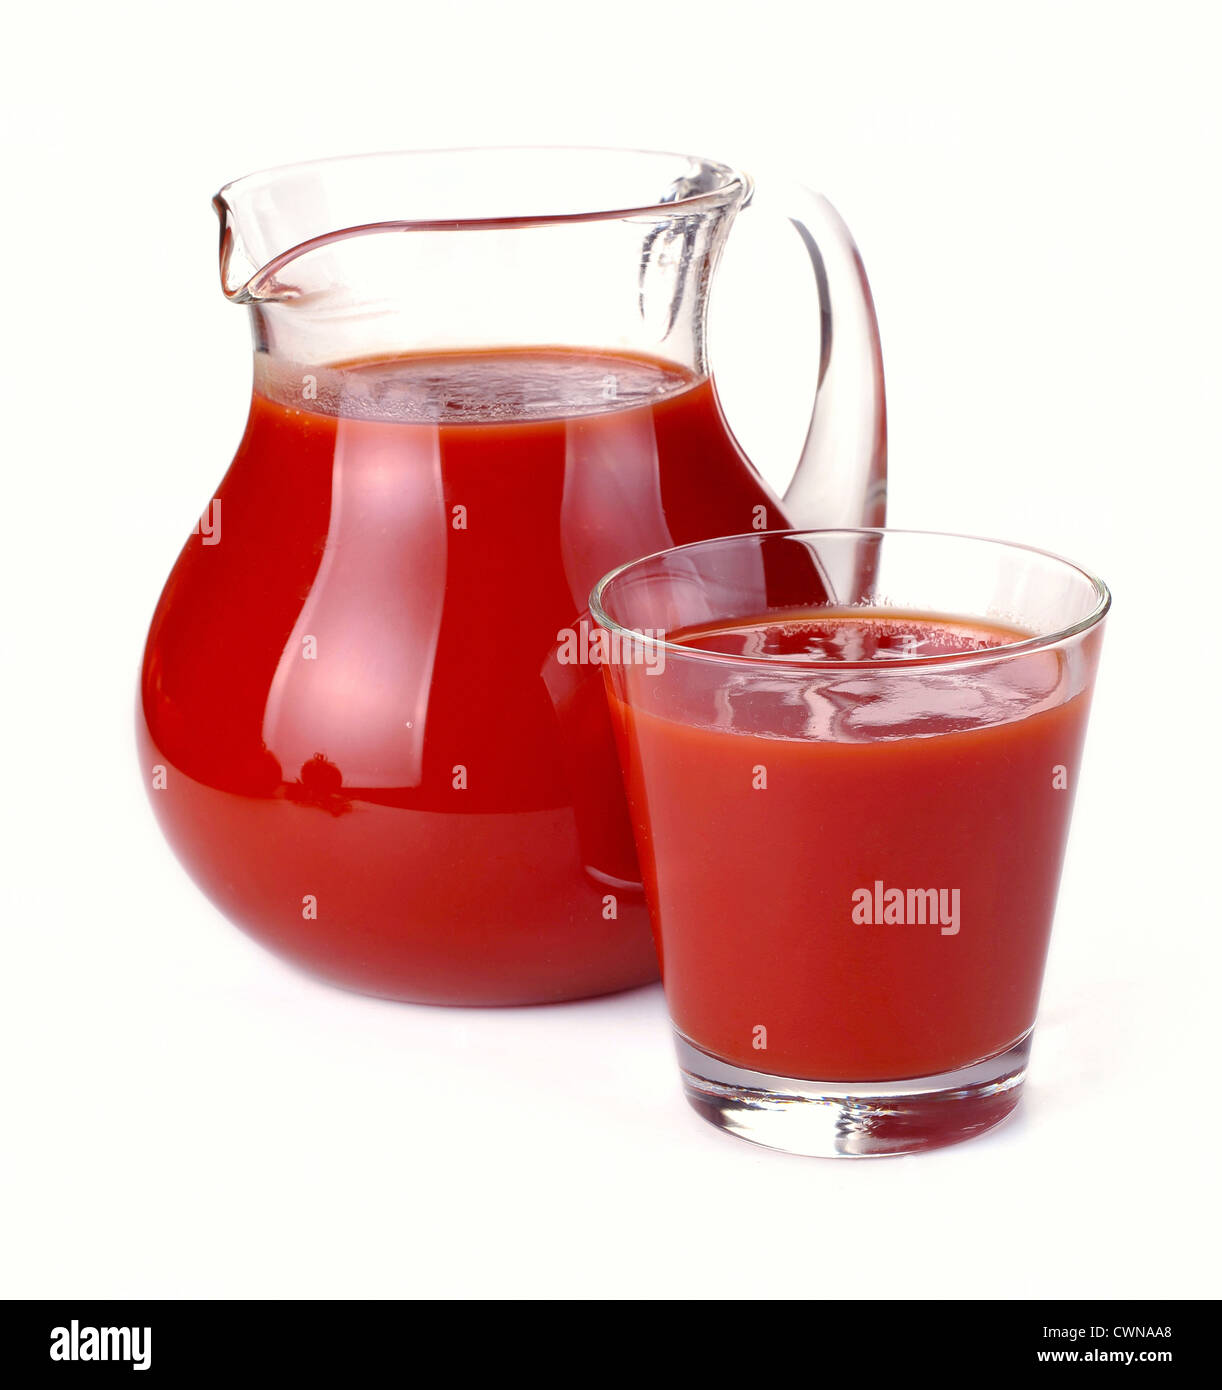 Red Juice In Glass Pitcher Jug Isolated On White Stock Photo